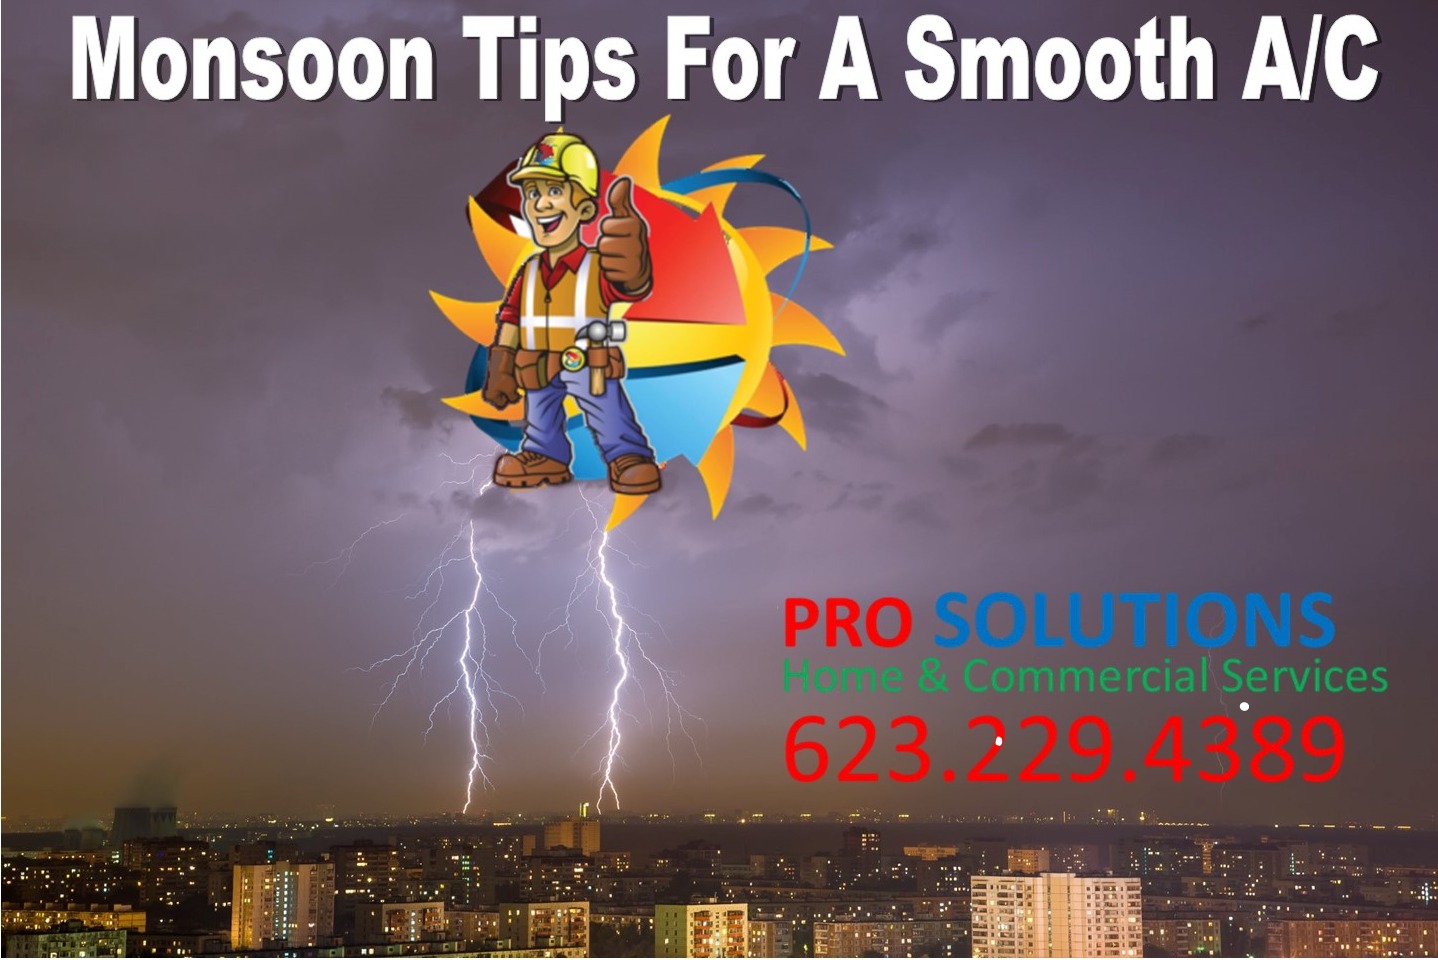 Monsoon Tips To Help Keep Your Air Conditioner Running Smooth